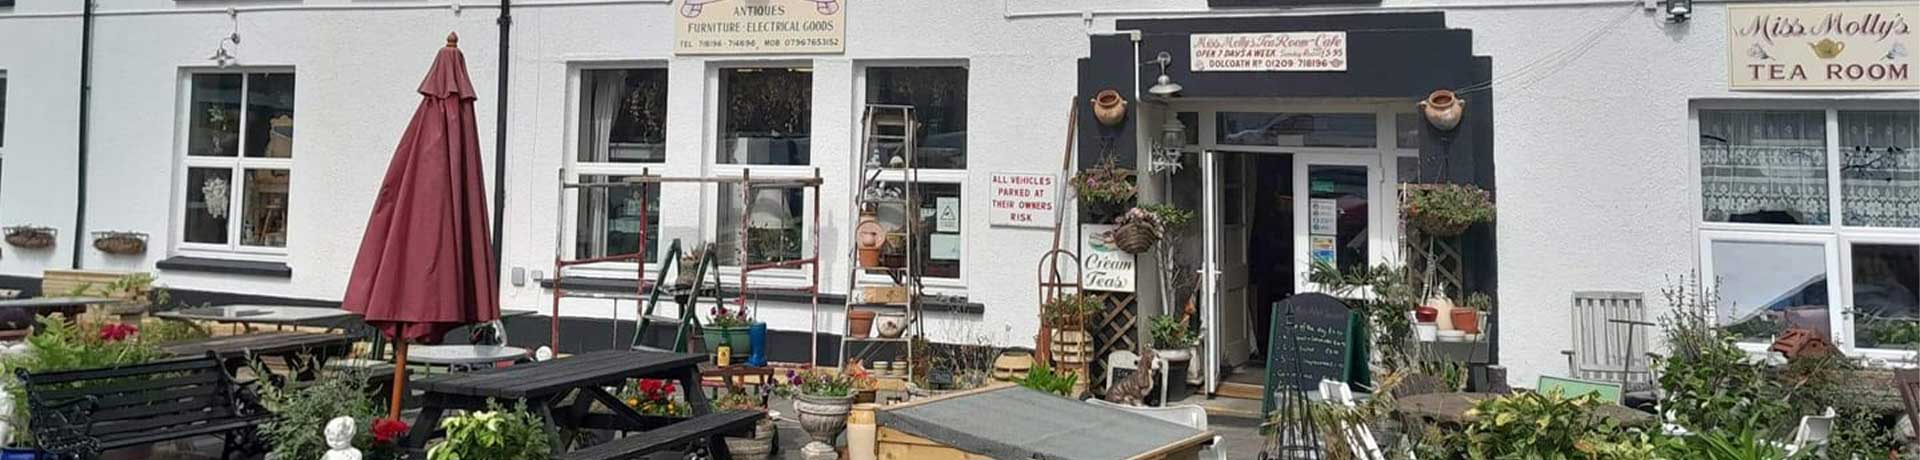 Antique shops in Cornwall